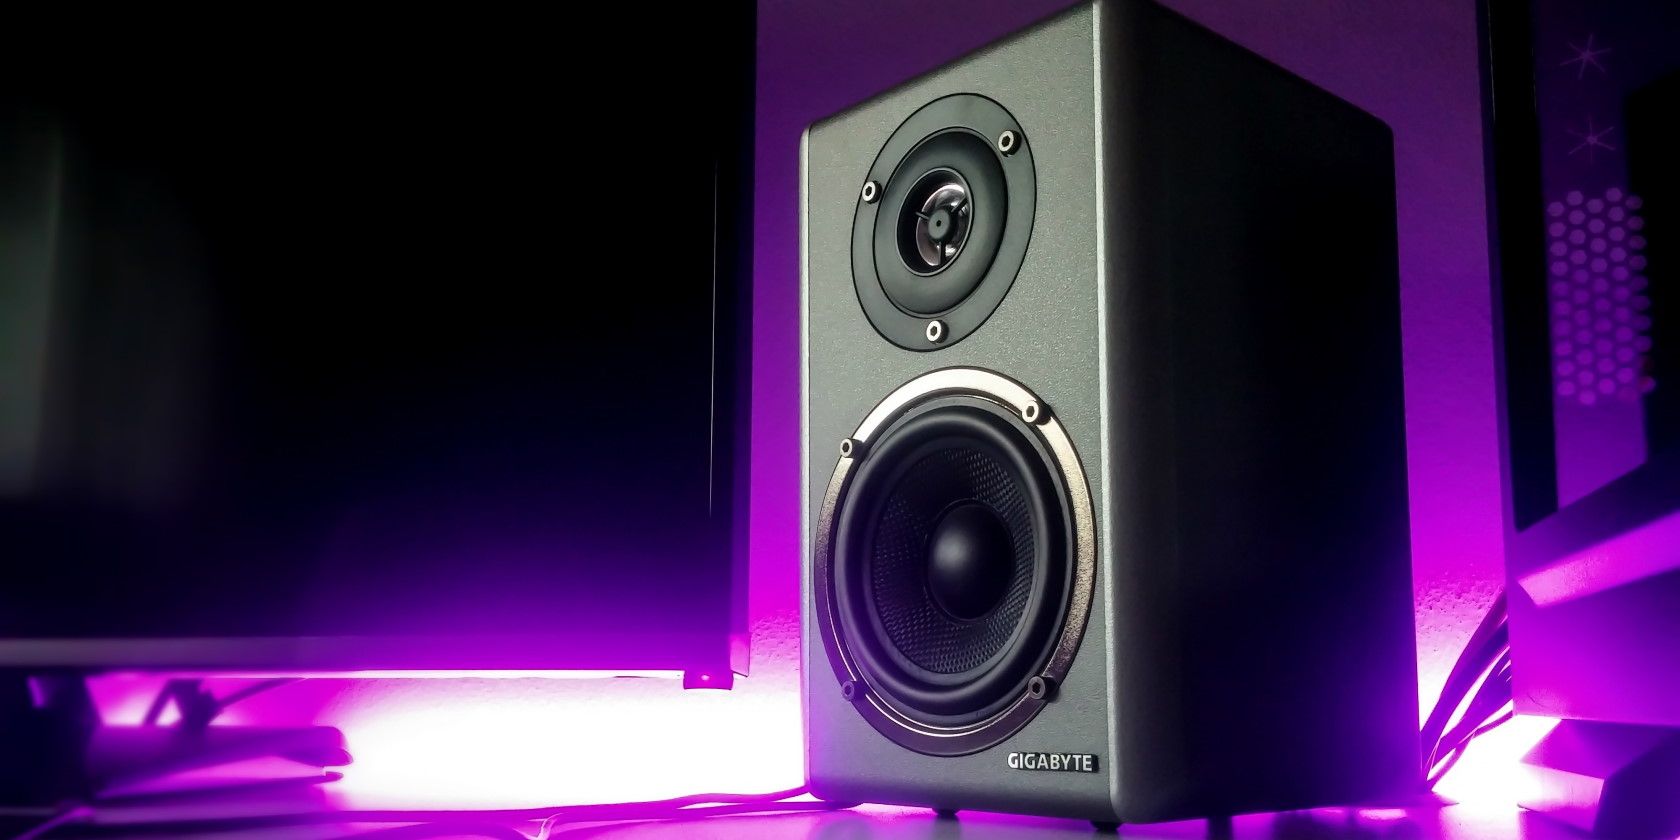 Close-up of black speakers in front of glowing purple backlight